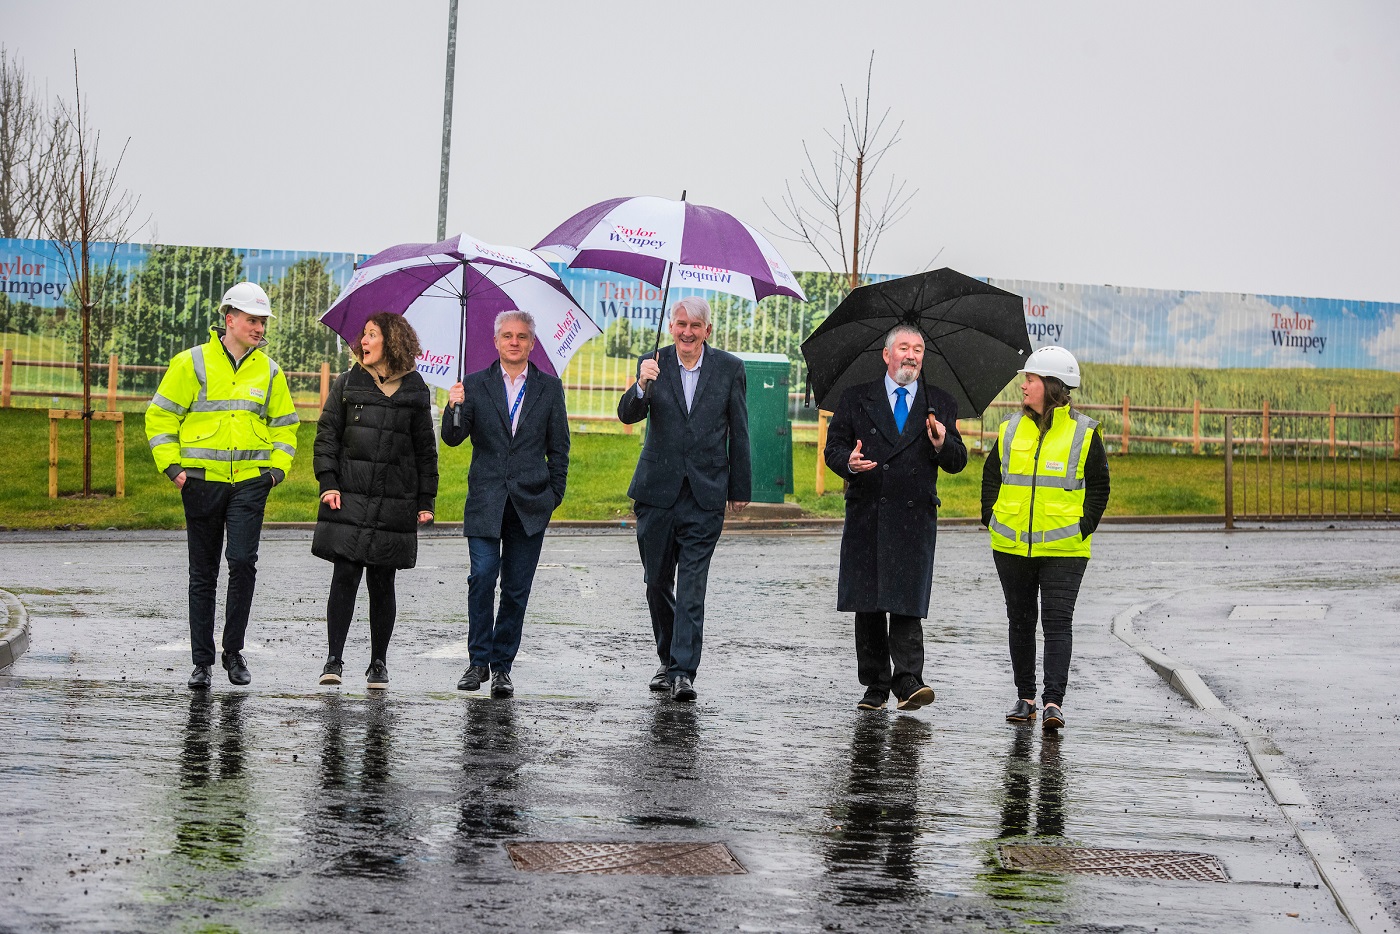 Taylor Wimpey to deliver more affordable homes for Barrhead Housing Association